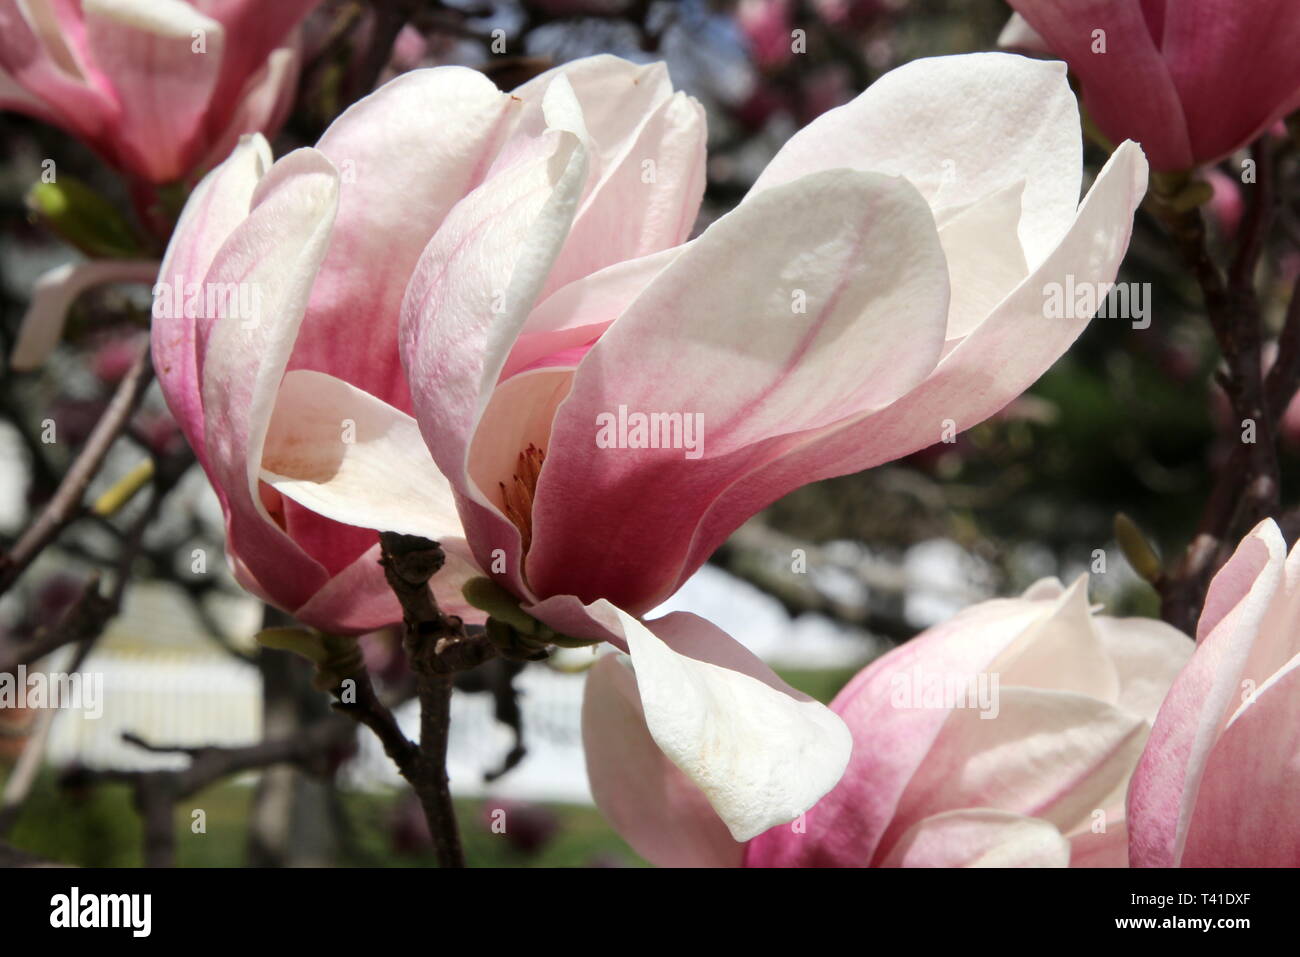 The cherry blossom has bloomed. Stock Photo